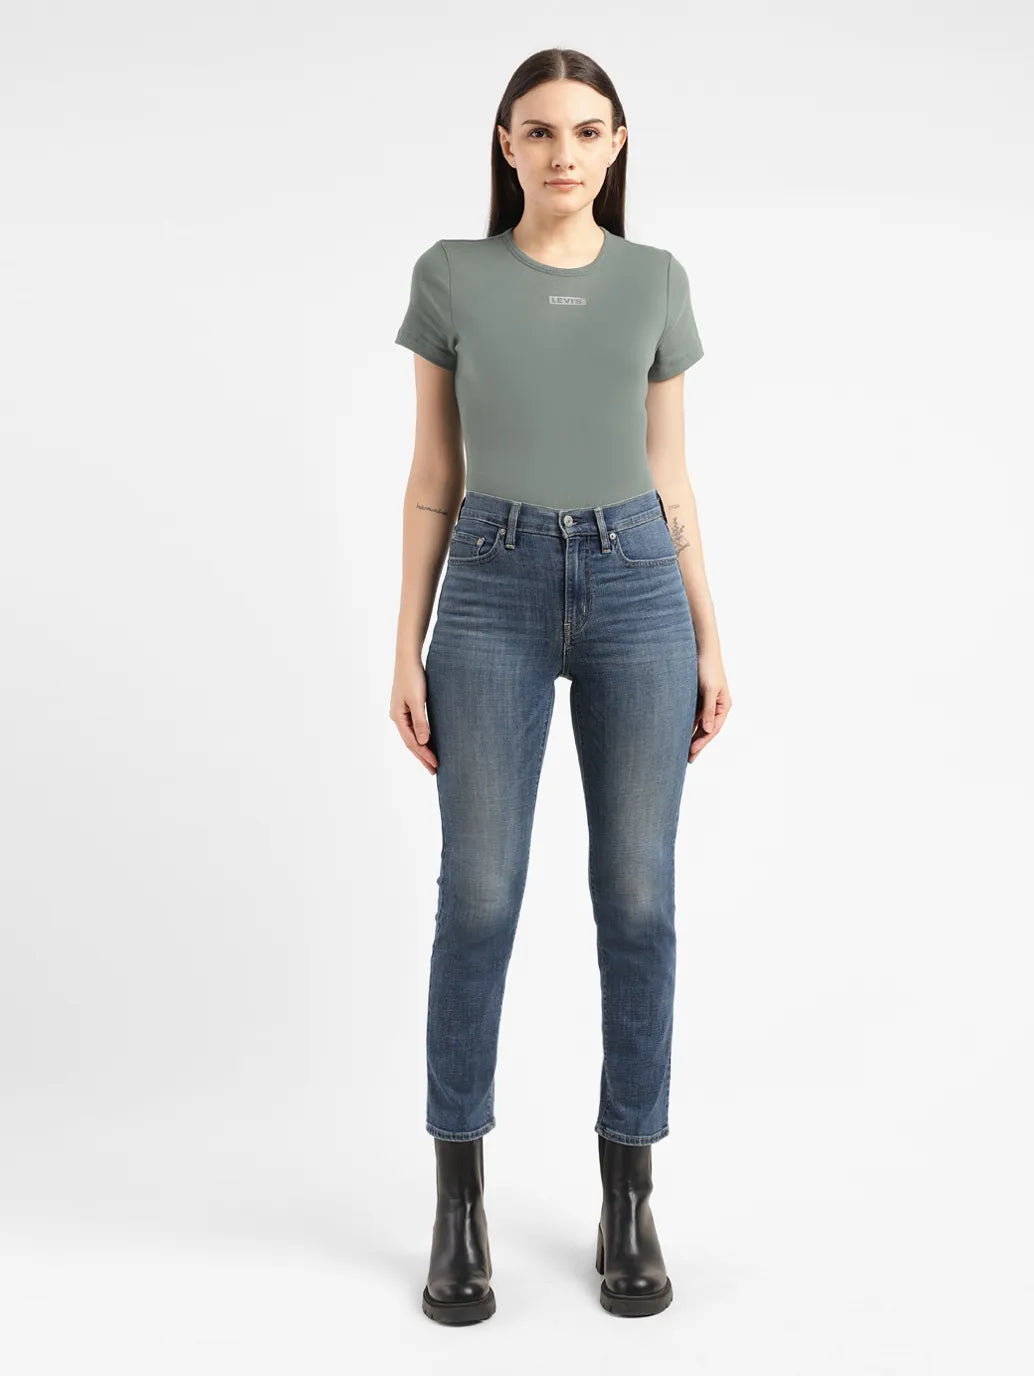 Women's Mid Rise 726 Flaired Fit Jeans